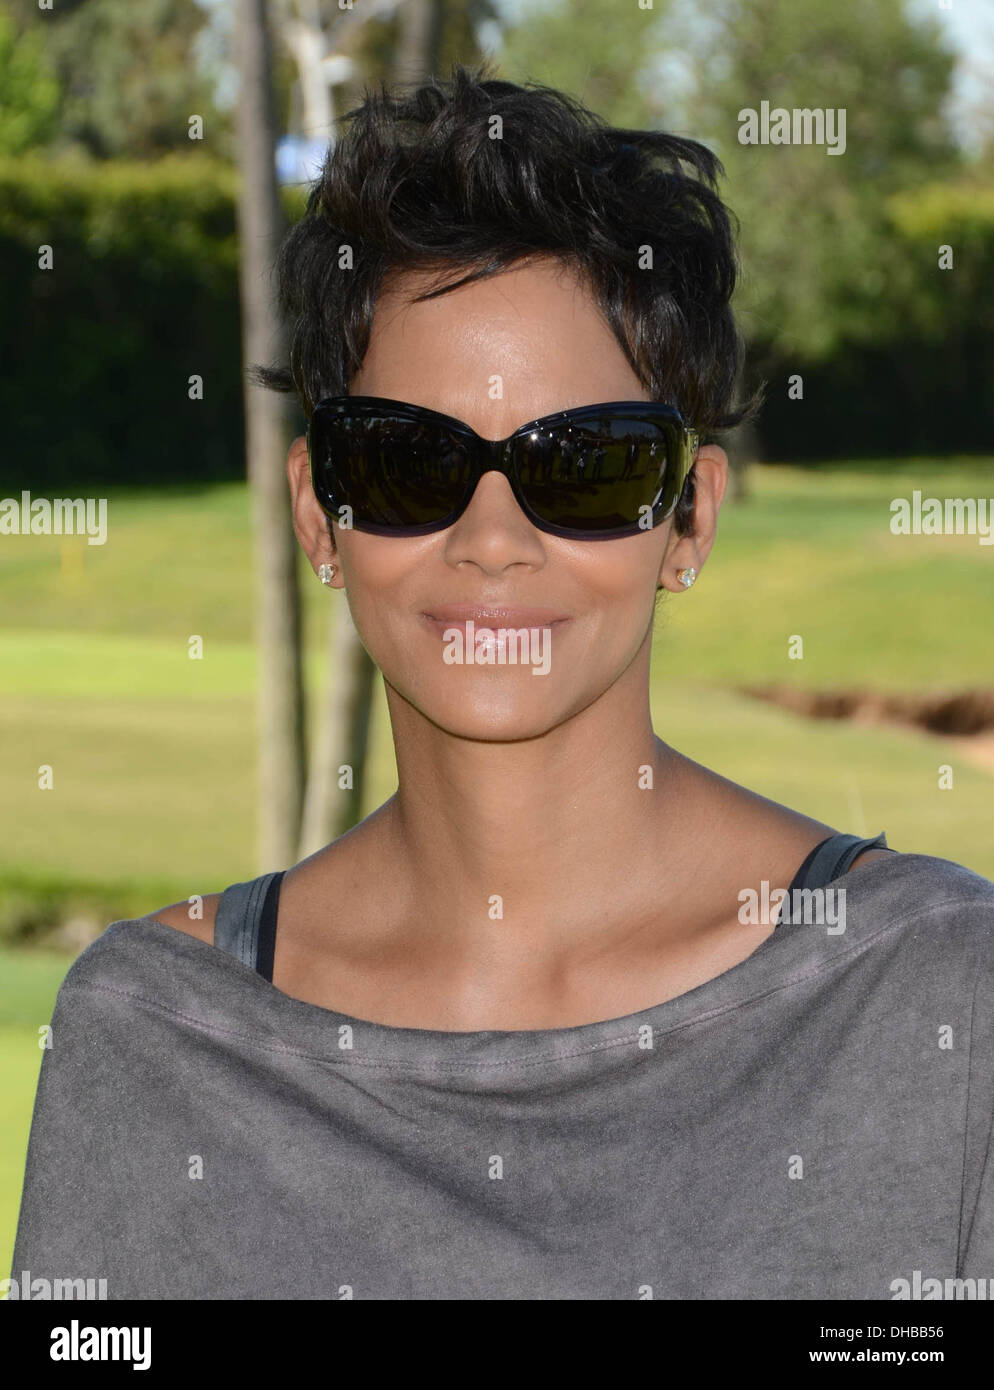 halle-berry-4th-annual-halle-berry-celebrity-golf-classic-held-at-DHBB56.jpg